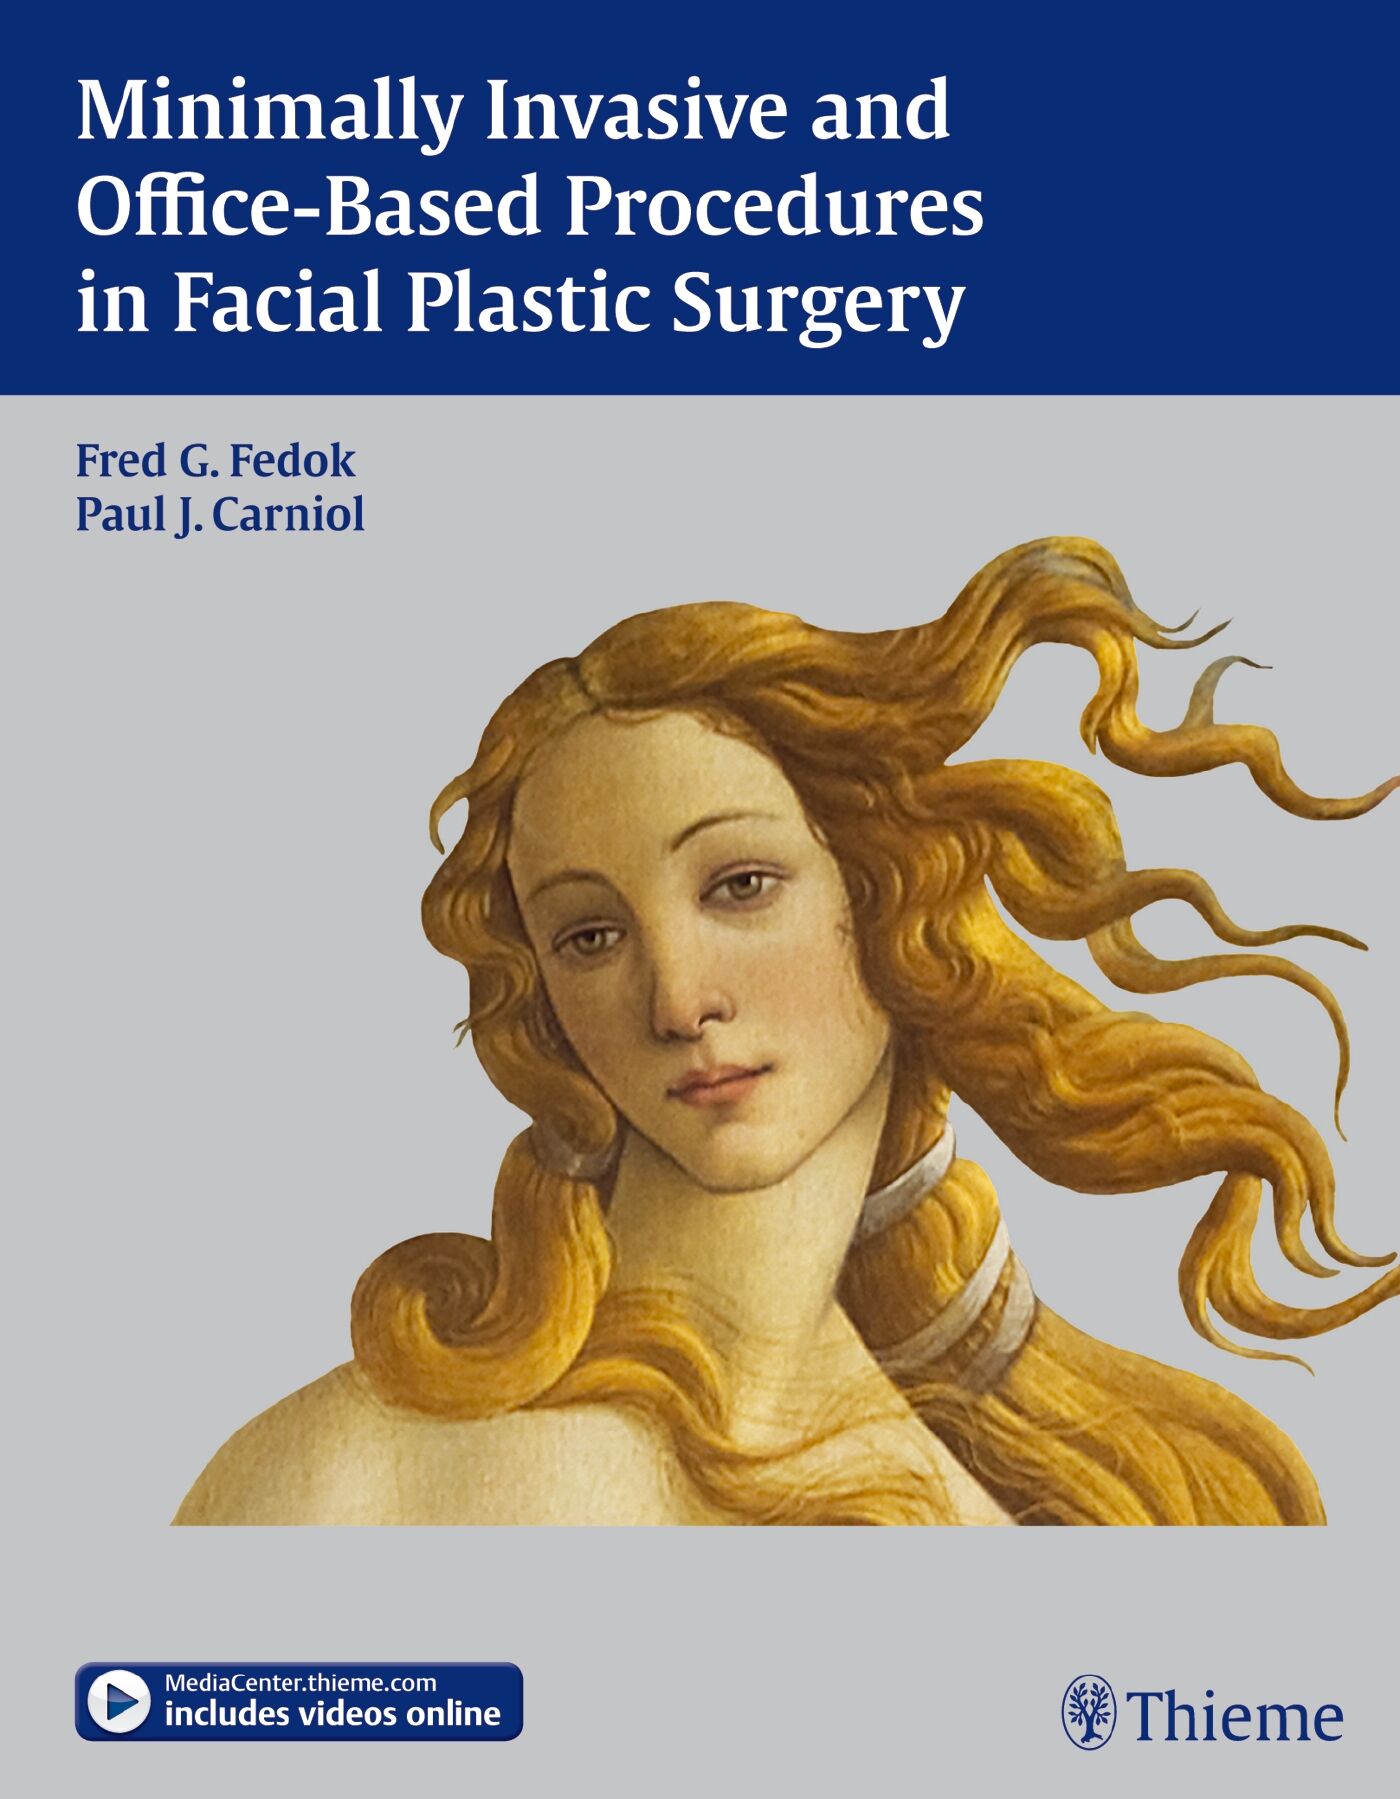 Minimally Invasive and Office-Based Procedures in Facial Plastic Surgery, 9781604065671